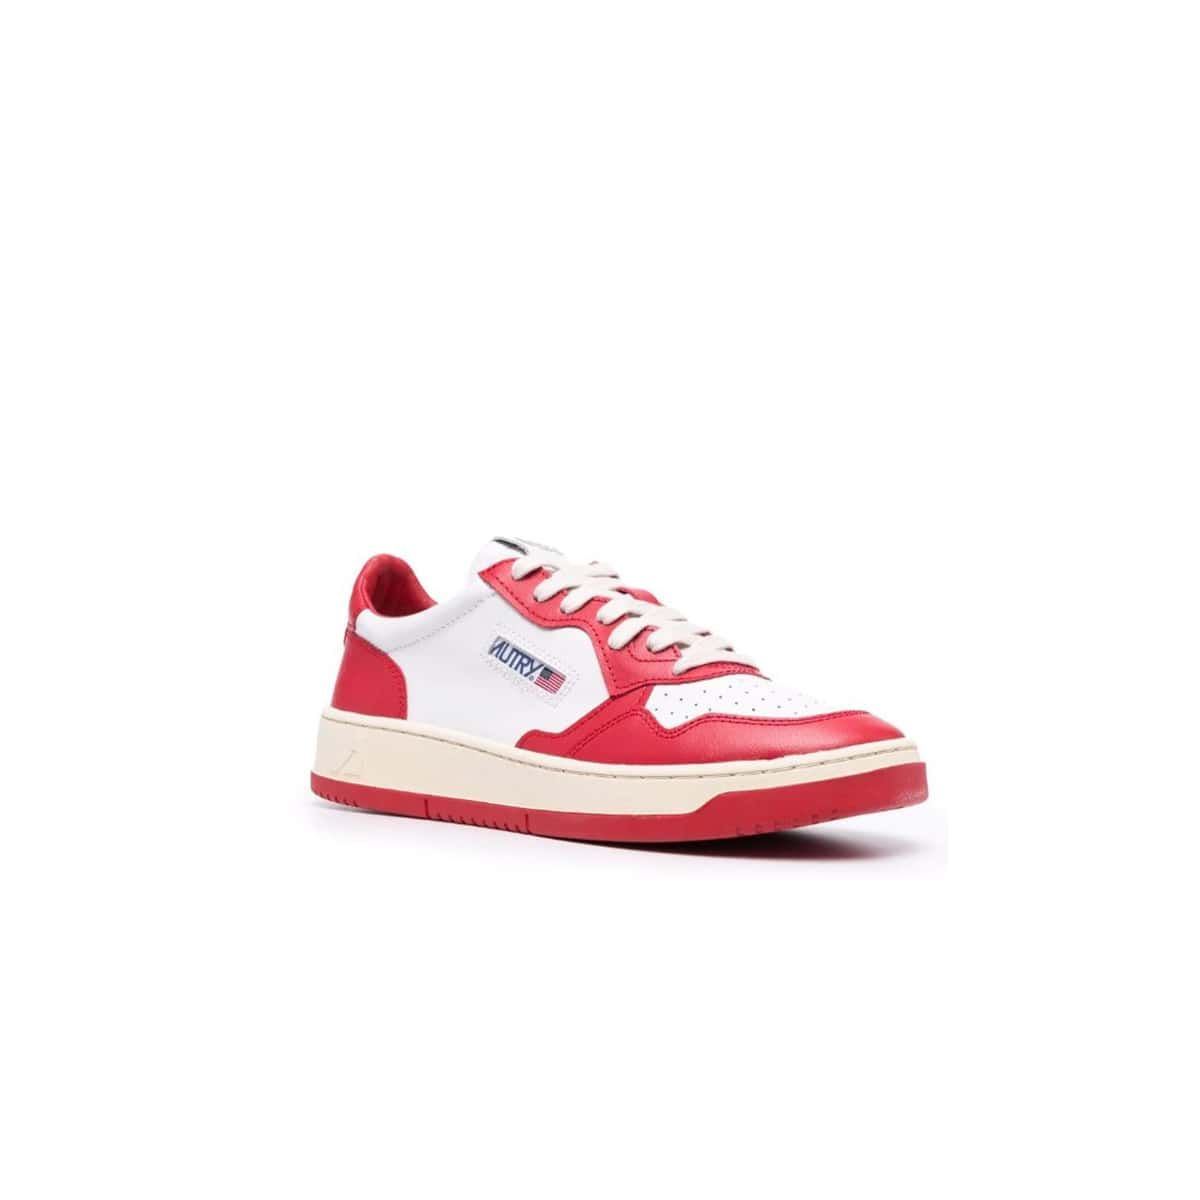 01 Low Top Sneakers In Red Leather